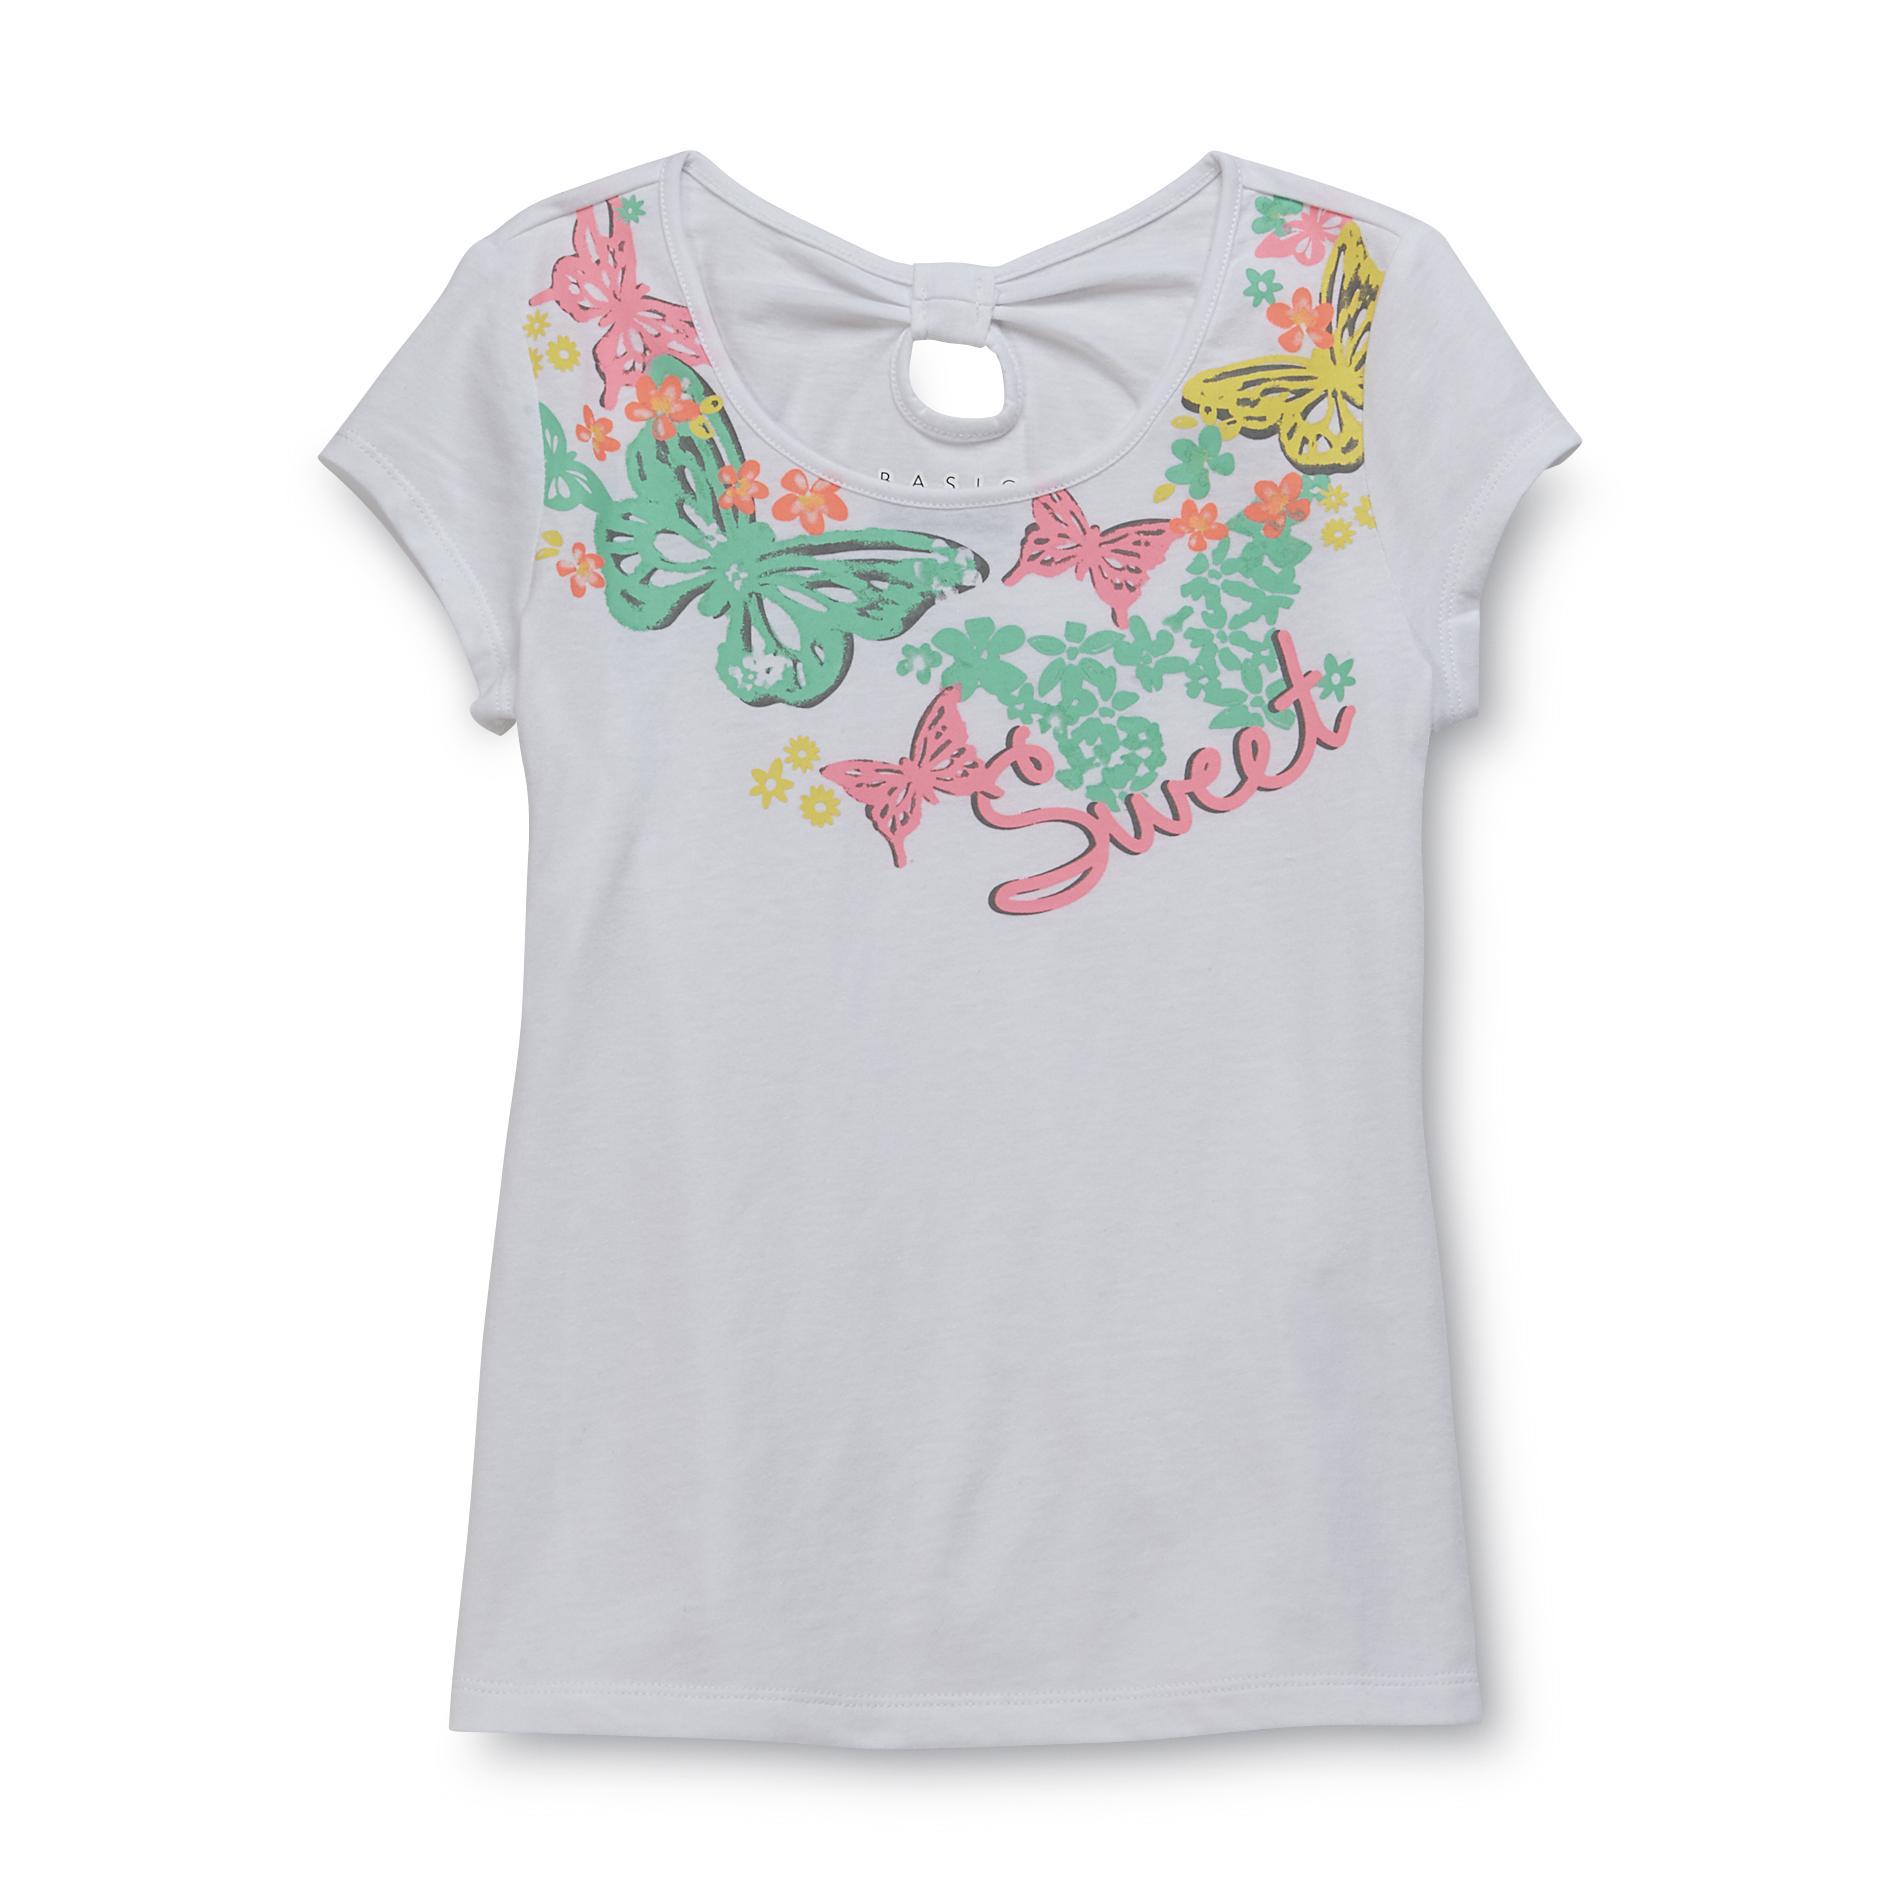 Basic Editions Girl's Keyhole-Back Top - Neon Butterflies & Sweet